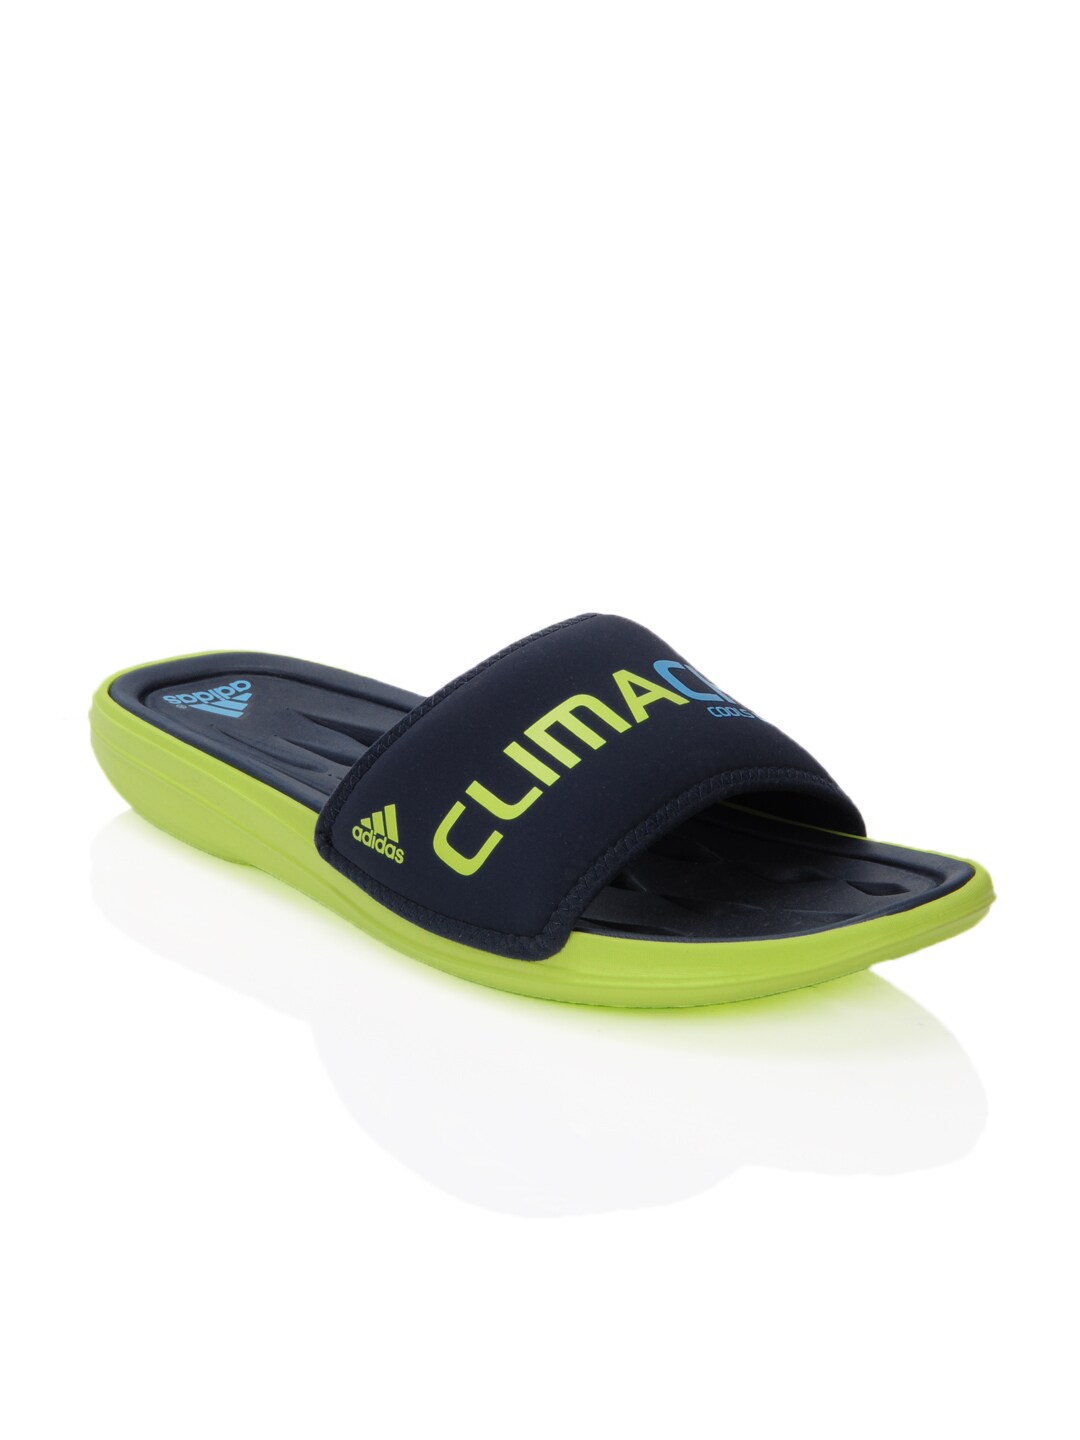 ADIDAS Men Recovery Slide Navy Blue Sandals